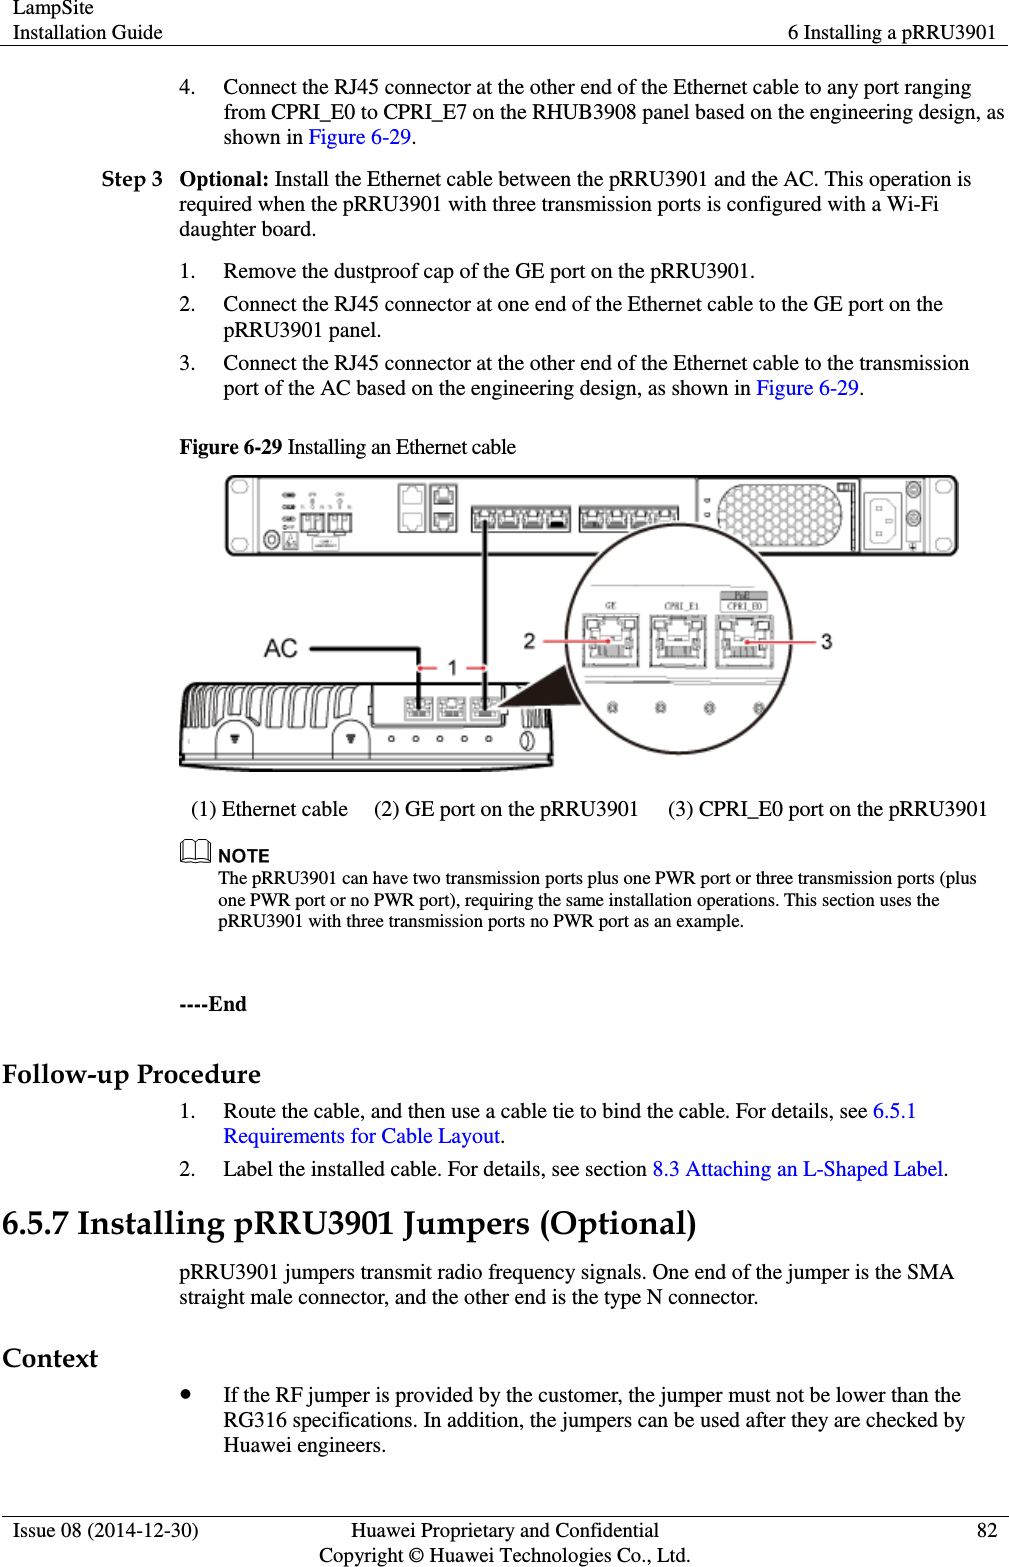 LampSite Installation Guide 6 Installing a pRRU3901  Issue 08 (2014-12-30) Huawei Proprietary and Confidential                                     Copyright © Huawei Technologies Co., Ltd. 82  4. Connect the RJ45 connector at the other end of the Ethernet cable to any port ranging from CPRI_E0 to CPRI_E7 on the RHUB3908 panel based on the engineering design, as shown in Figure 6-29. Step 3 Optional: Install the Ethernet cable between the pRRU3901 and the AC. This operation is required when the pRRU3901 with three transmission ports is configured with a Wi-Fi daughter board. 1. Remove the dustproof cap of the GE port on the pRRU3901. 2. Connect the RJ45 connector at one end of the Ethernet cable to the GE port on the pRRU3901 panel. 3. Connect the RJ45 connector at the other end of the Ethernet cable to the transmission port of the AC based on the engineering design, as shown in Figure 6-29. Figure 6-29 Installing an Ethernet cable  (1) Ethernet cable (2) GE port on the pRRU3901 (3) CPRI_E0 port on the pRRU3901  The pRRU3901 can have two transmission ports plus one PWR port or three transmission ports (plus one PWR port or no PWR port), requiring the same installation operations. This section uses the pRRU3901 with three transmission ports no PWR port as an example.  ----End Follow-up Procedure 1. Route the cable, and then use a cable tie to bind the cable. For details, see 6.5.1 Requirements for Cable Layout. 2. Label the installed cable. For details, see section 8.3 Attaching an L-Shaped Label. 6.5.7 Installing pRRU3901 Jumpers (Optional) pRRU3901 jumpers transmit radio frequency signals. One end of the jumper is the SMA straight male connector, and the other end is the type N connector. Context  If the RF jumper is provided by the customer, the jumper must not be lower than the RG316 specifications. In addition, the jumpers can be used after they are checked by Huawei engineers. 